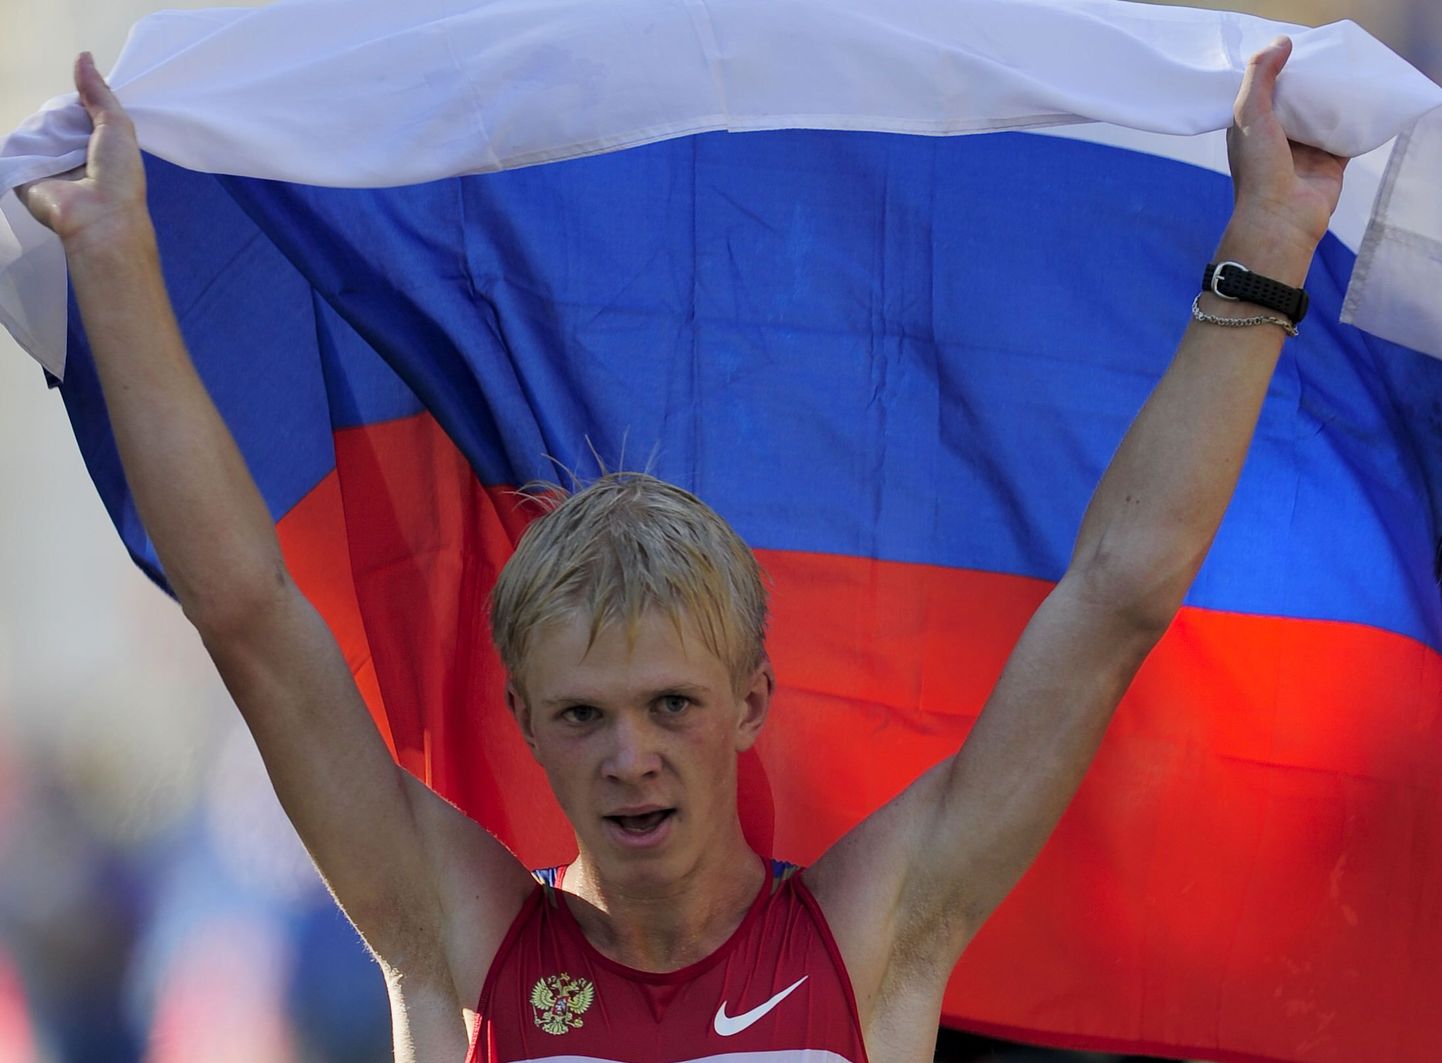 Russia's Stanislav Emelyanov celebrates with a russian flag after winning the men's 20km walk at the 2010 European Athletics Championships at the Olympic Stadium in Barcelona on July 27, 2010.    AFP PHOTO / JOSEP LAGO